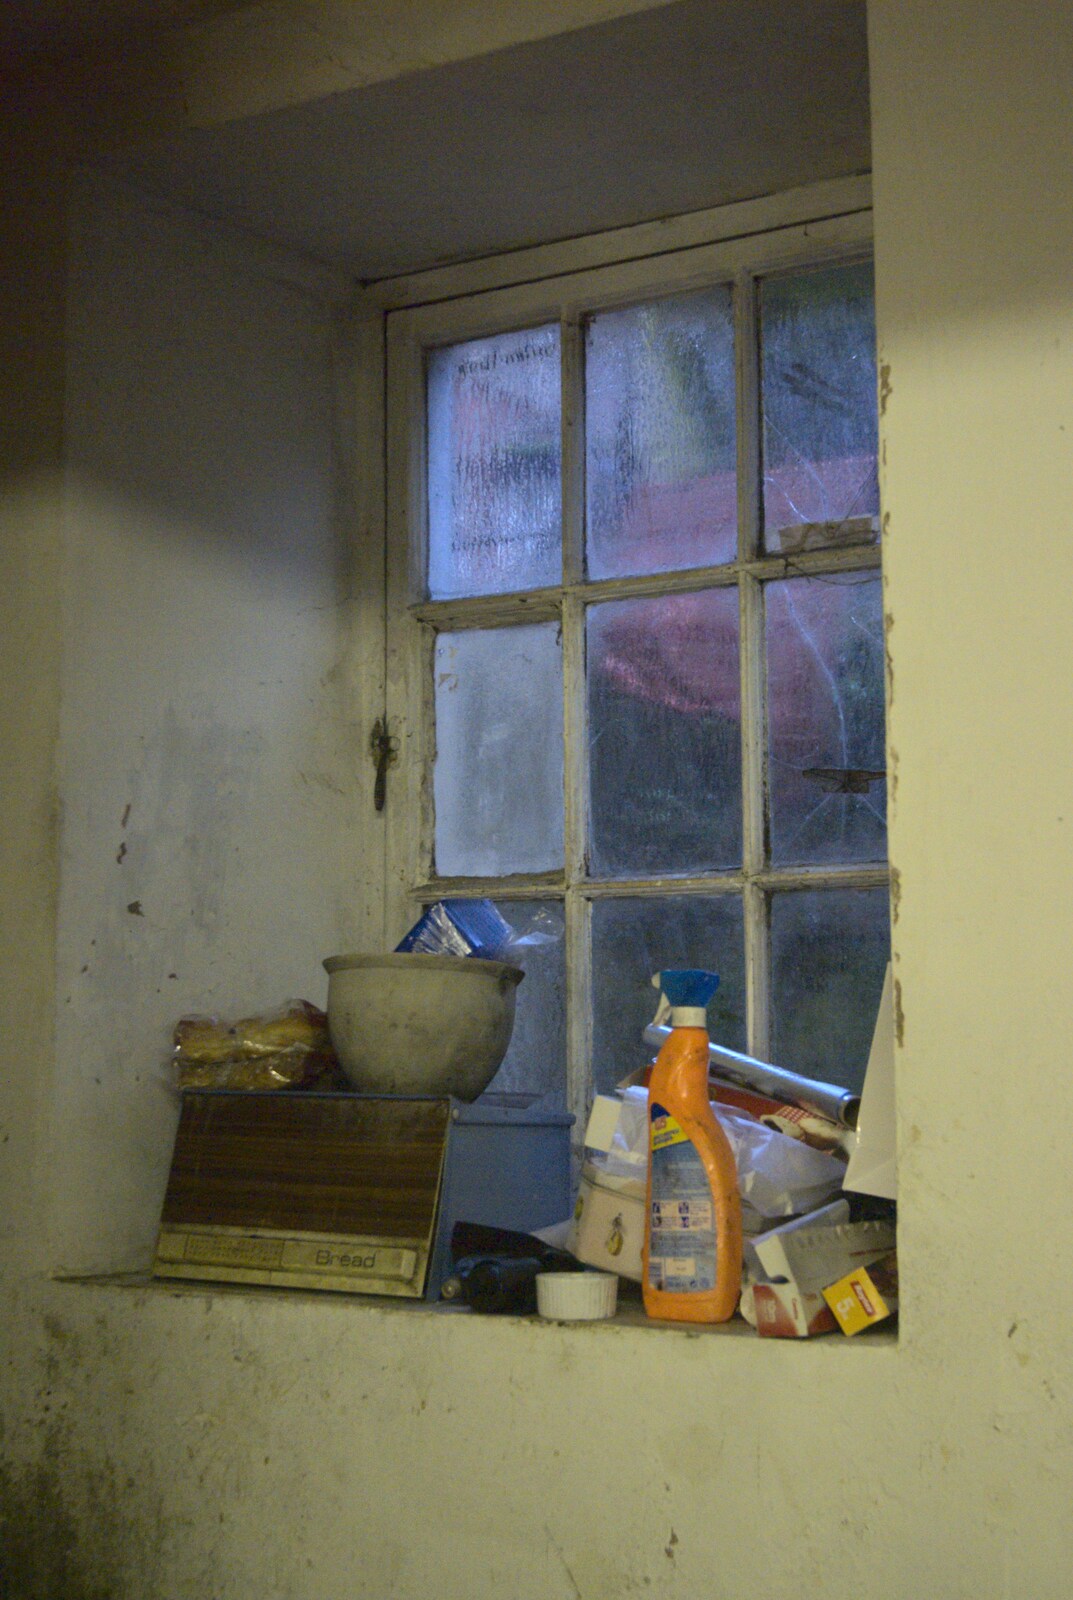 A cluttered windowsill from Christmas at Number 19, Blackrock, County Dublin, Ireland - 25th December 2009